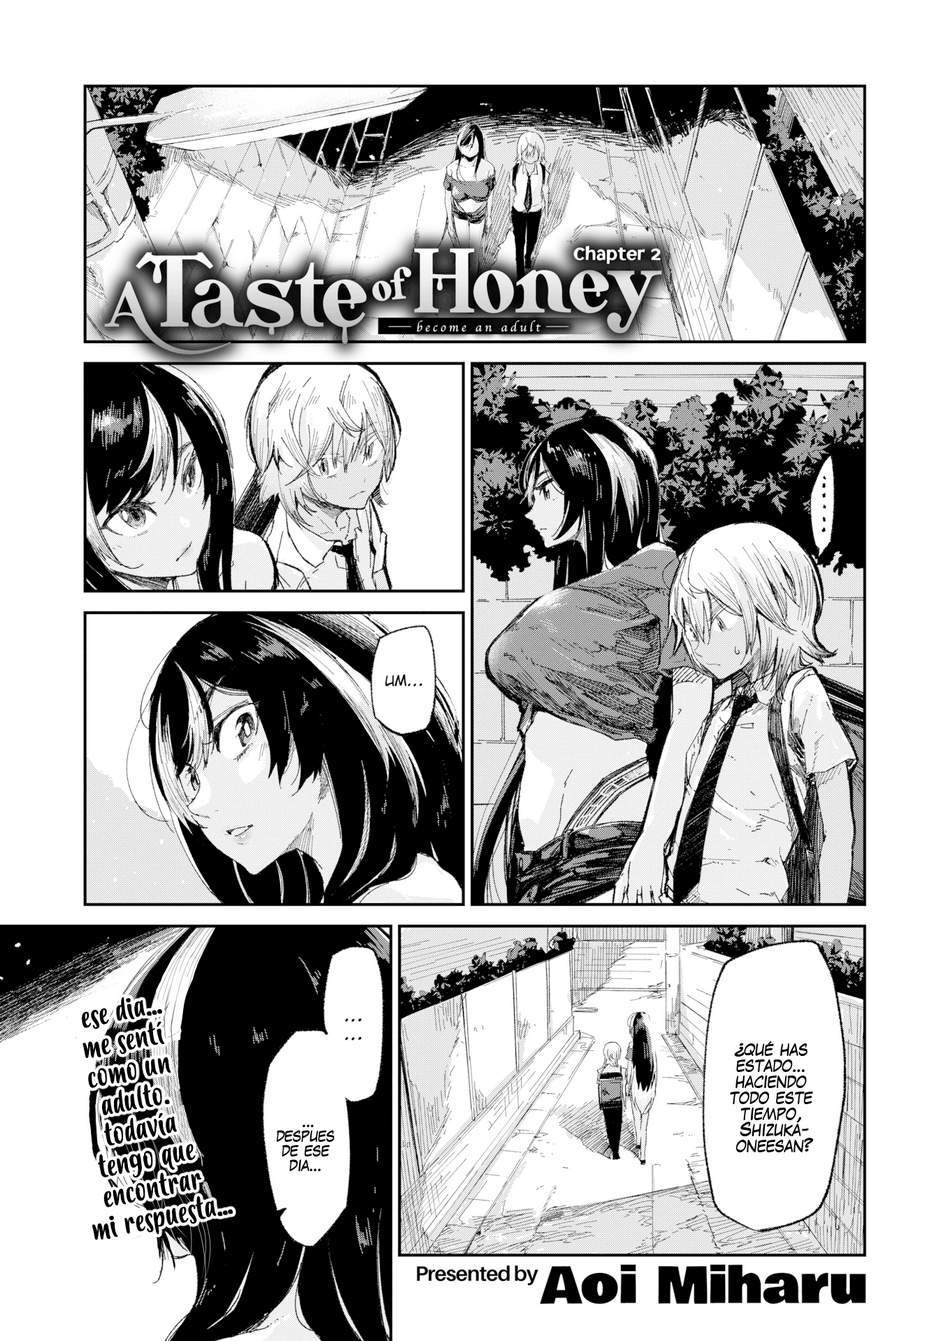 A Taste of Honey #2 - Page #1